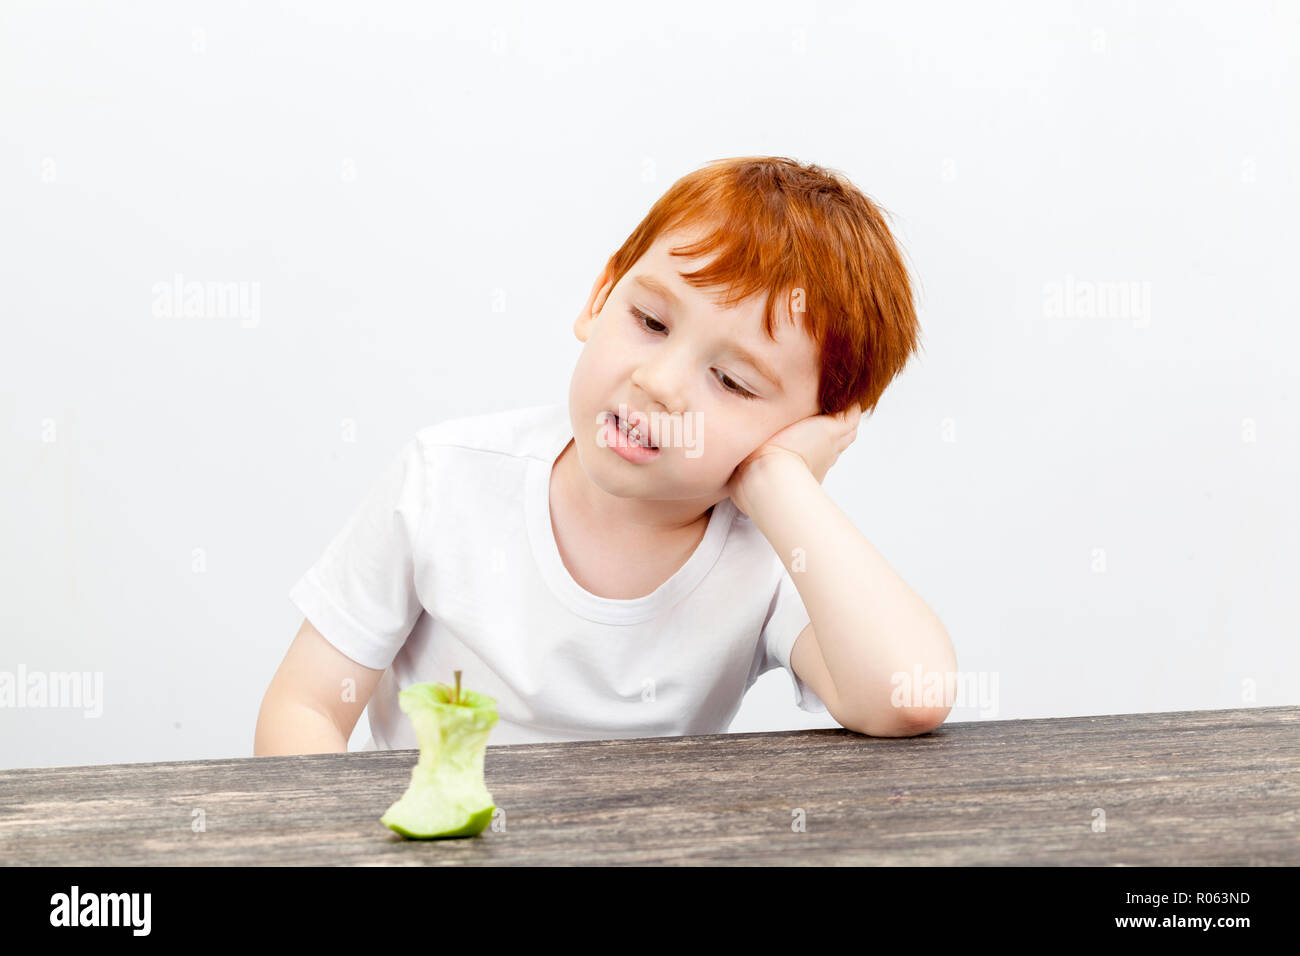 portrait of a boy with red hair and freckles at a kitchen table, looking at a stub of a large apple eaten, little used post-processing a portrait, a b Stock Photo